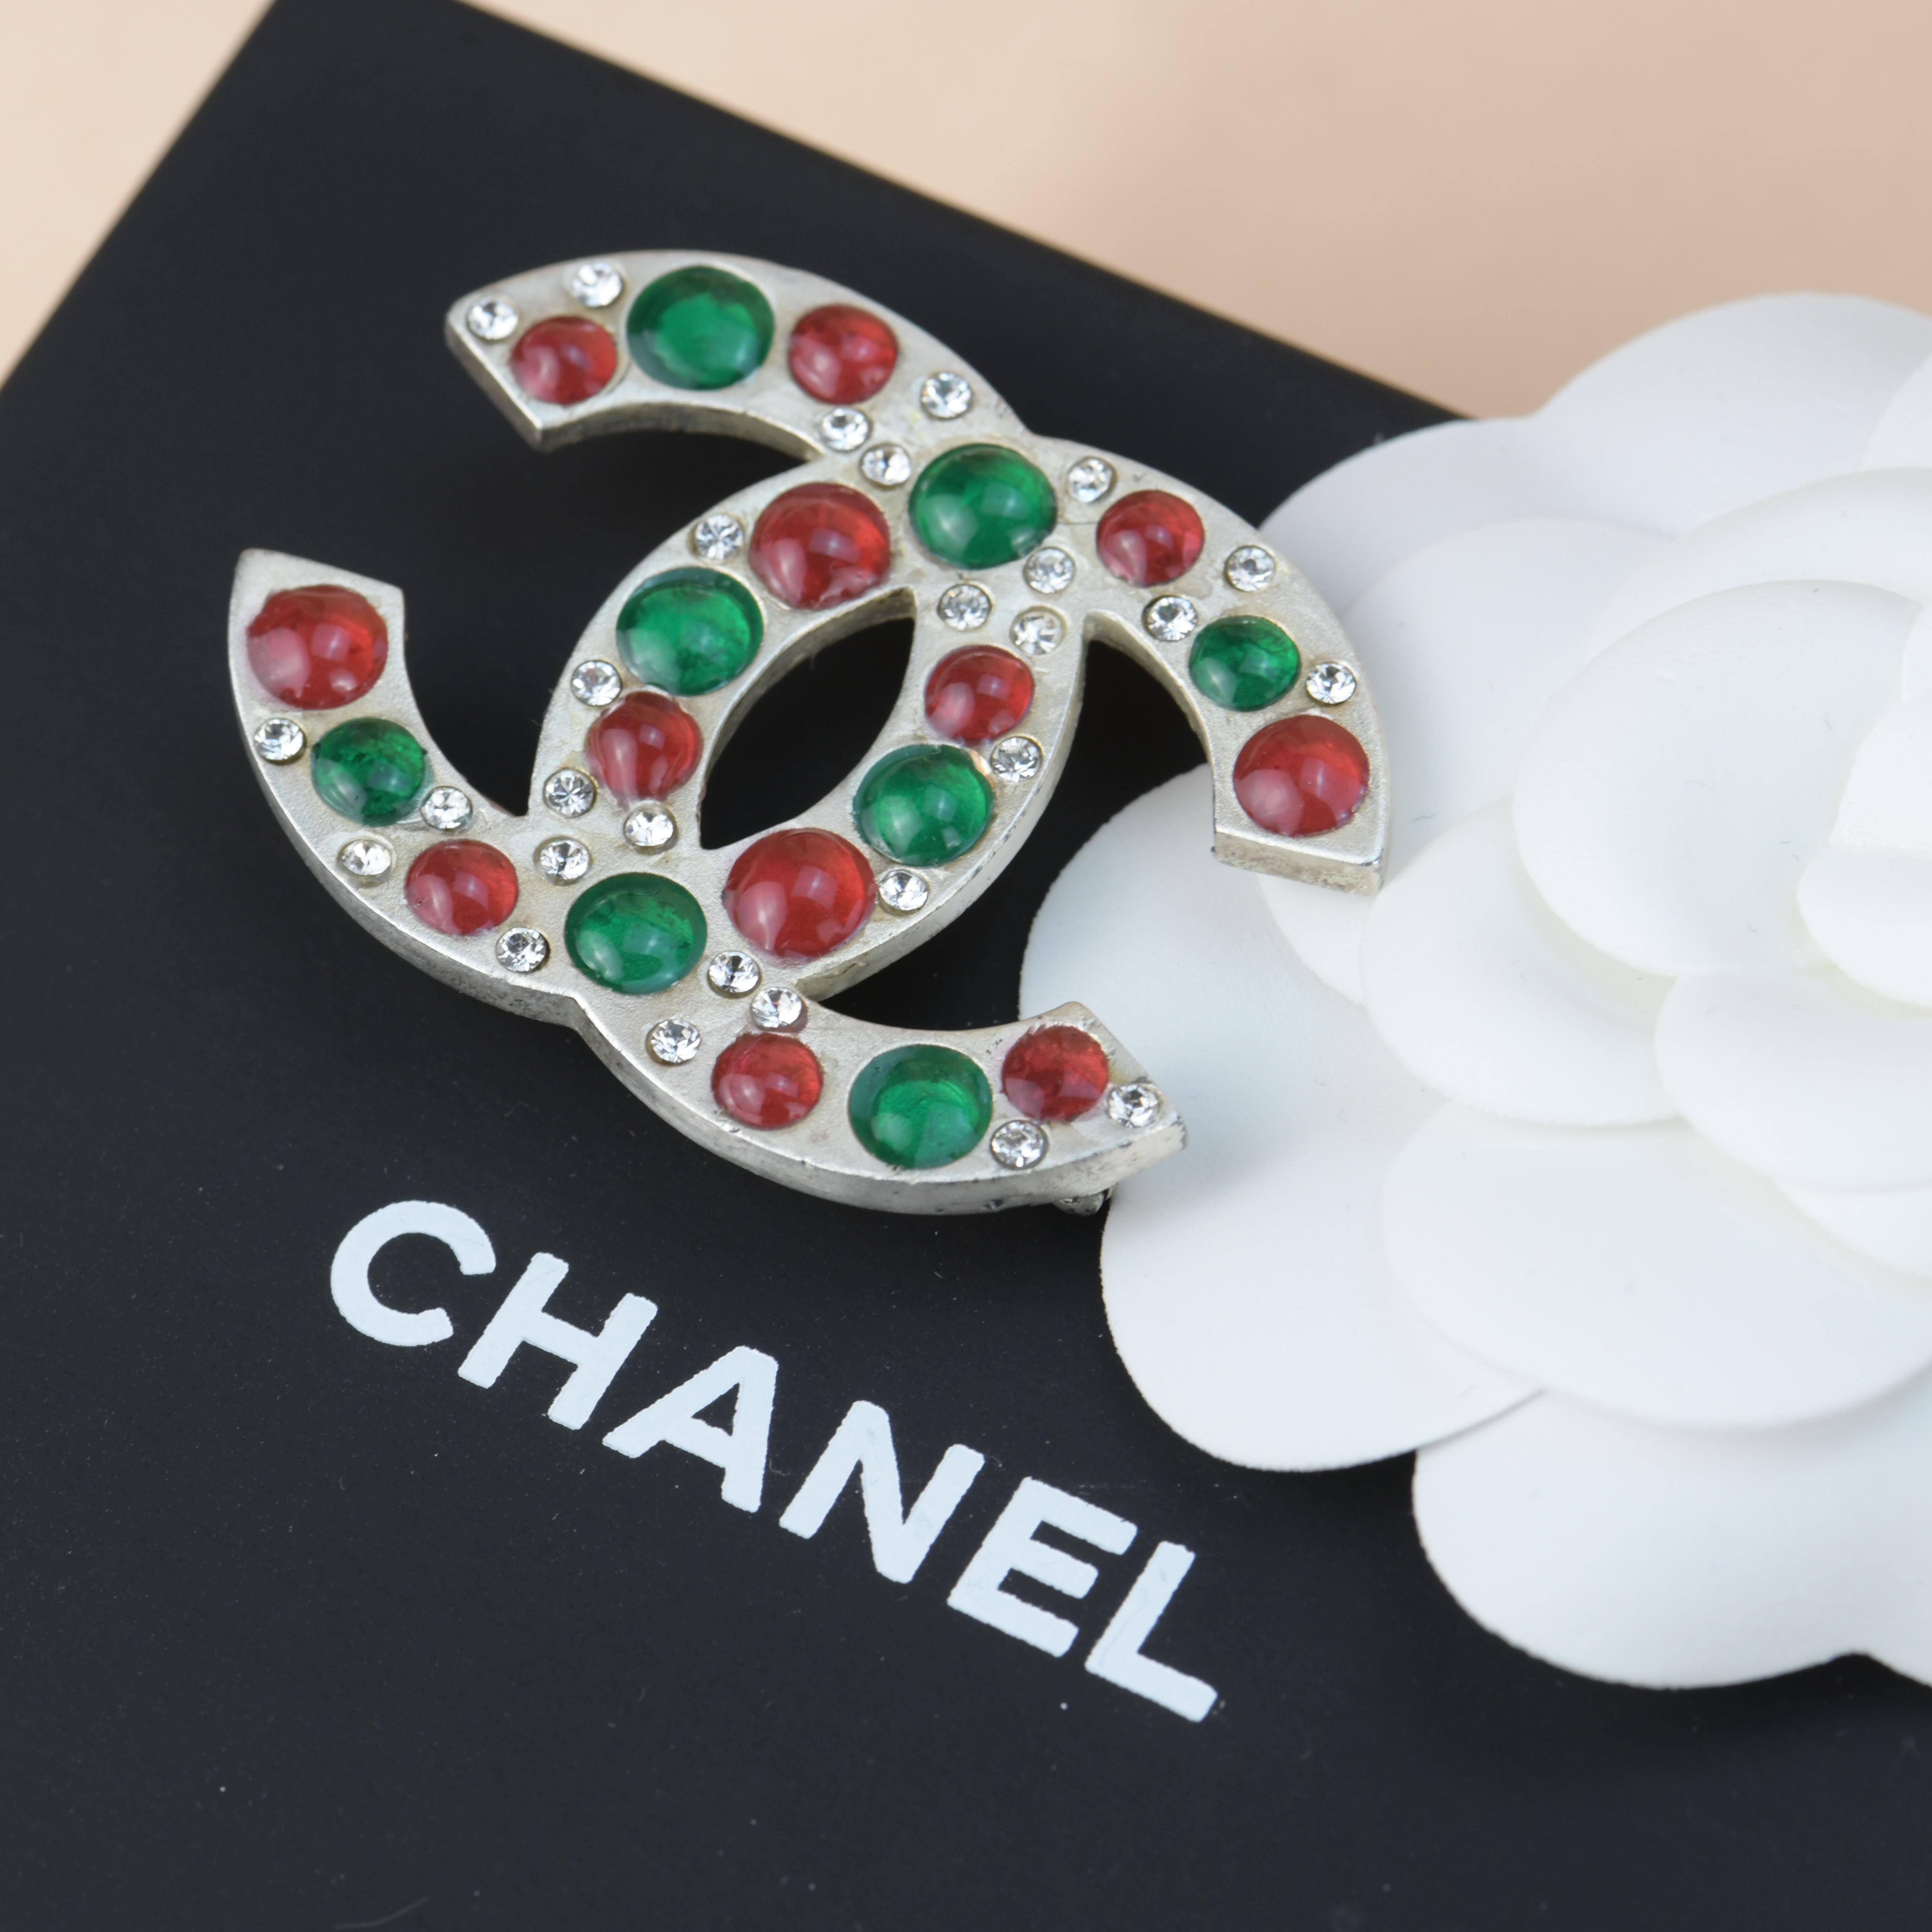 Brand: Chanel 
Period: Approx. 2003
Stamp Date: 03A
Model: Brooch
__________________________________
Metal: Silver Gilt
Stone: Gripoix Glass
Measurement: Approx. 48mm W * 33mm H
Weight: 15g
__________________________________
Condition Excellent